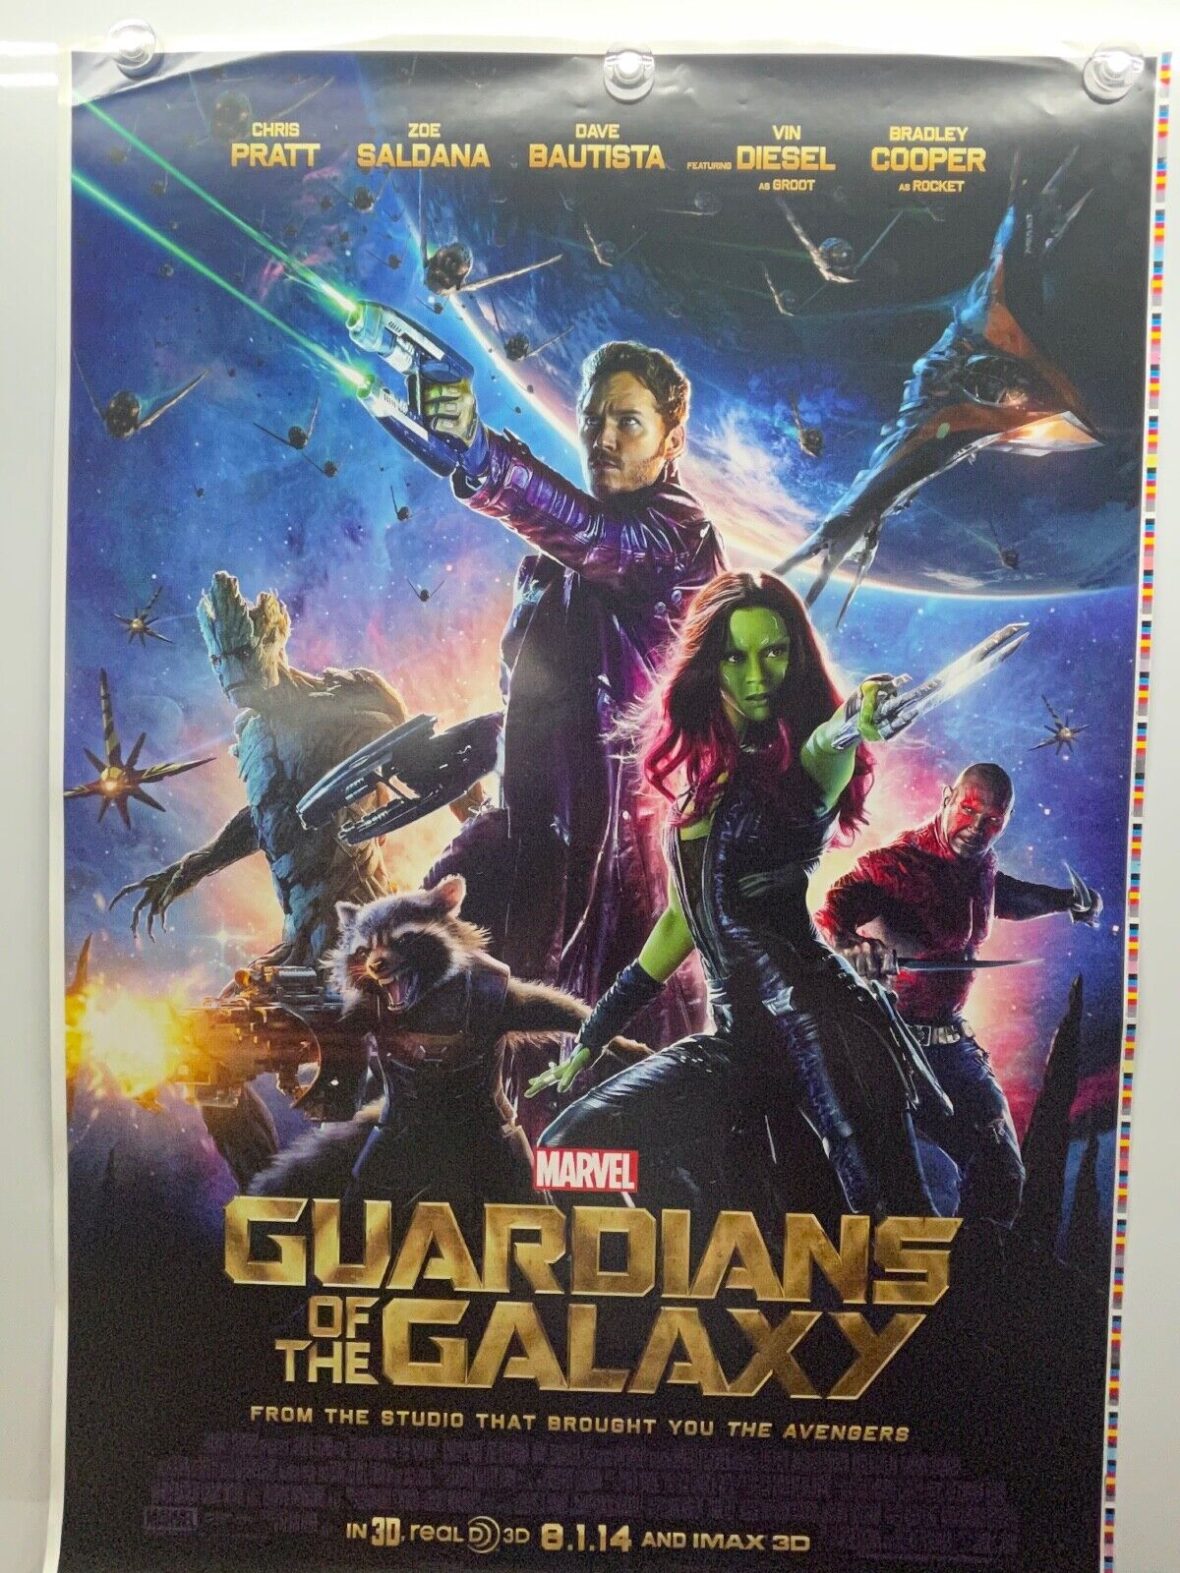 Most Valuable Guardians of the Galaxy Memorabilia: Teaser Poster